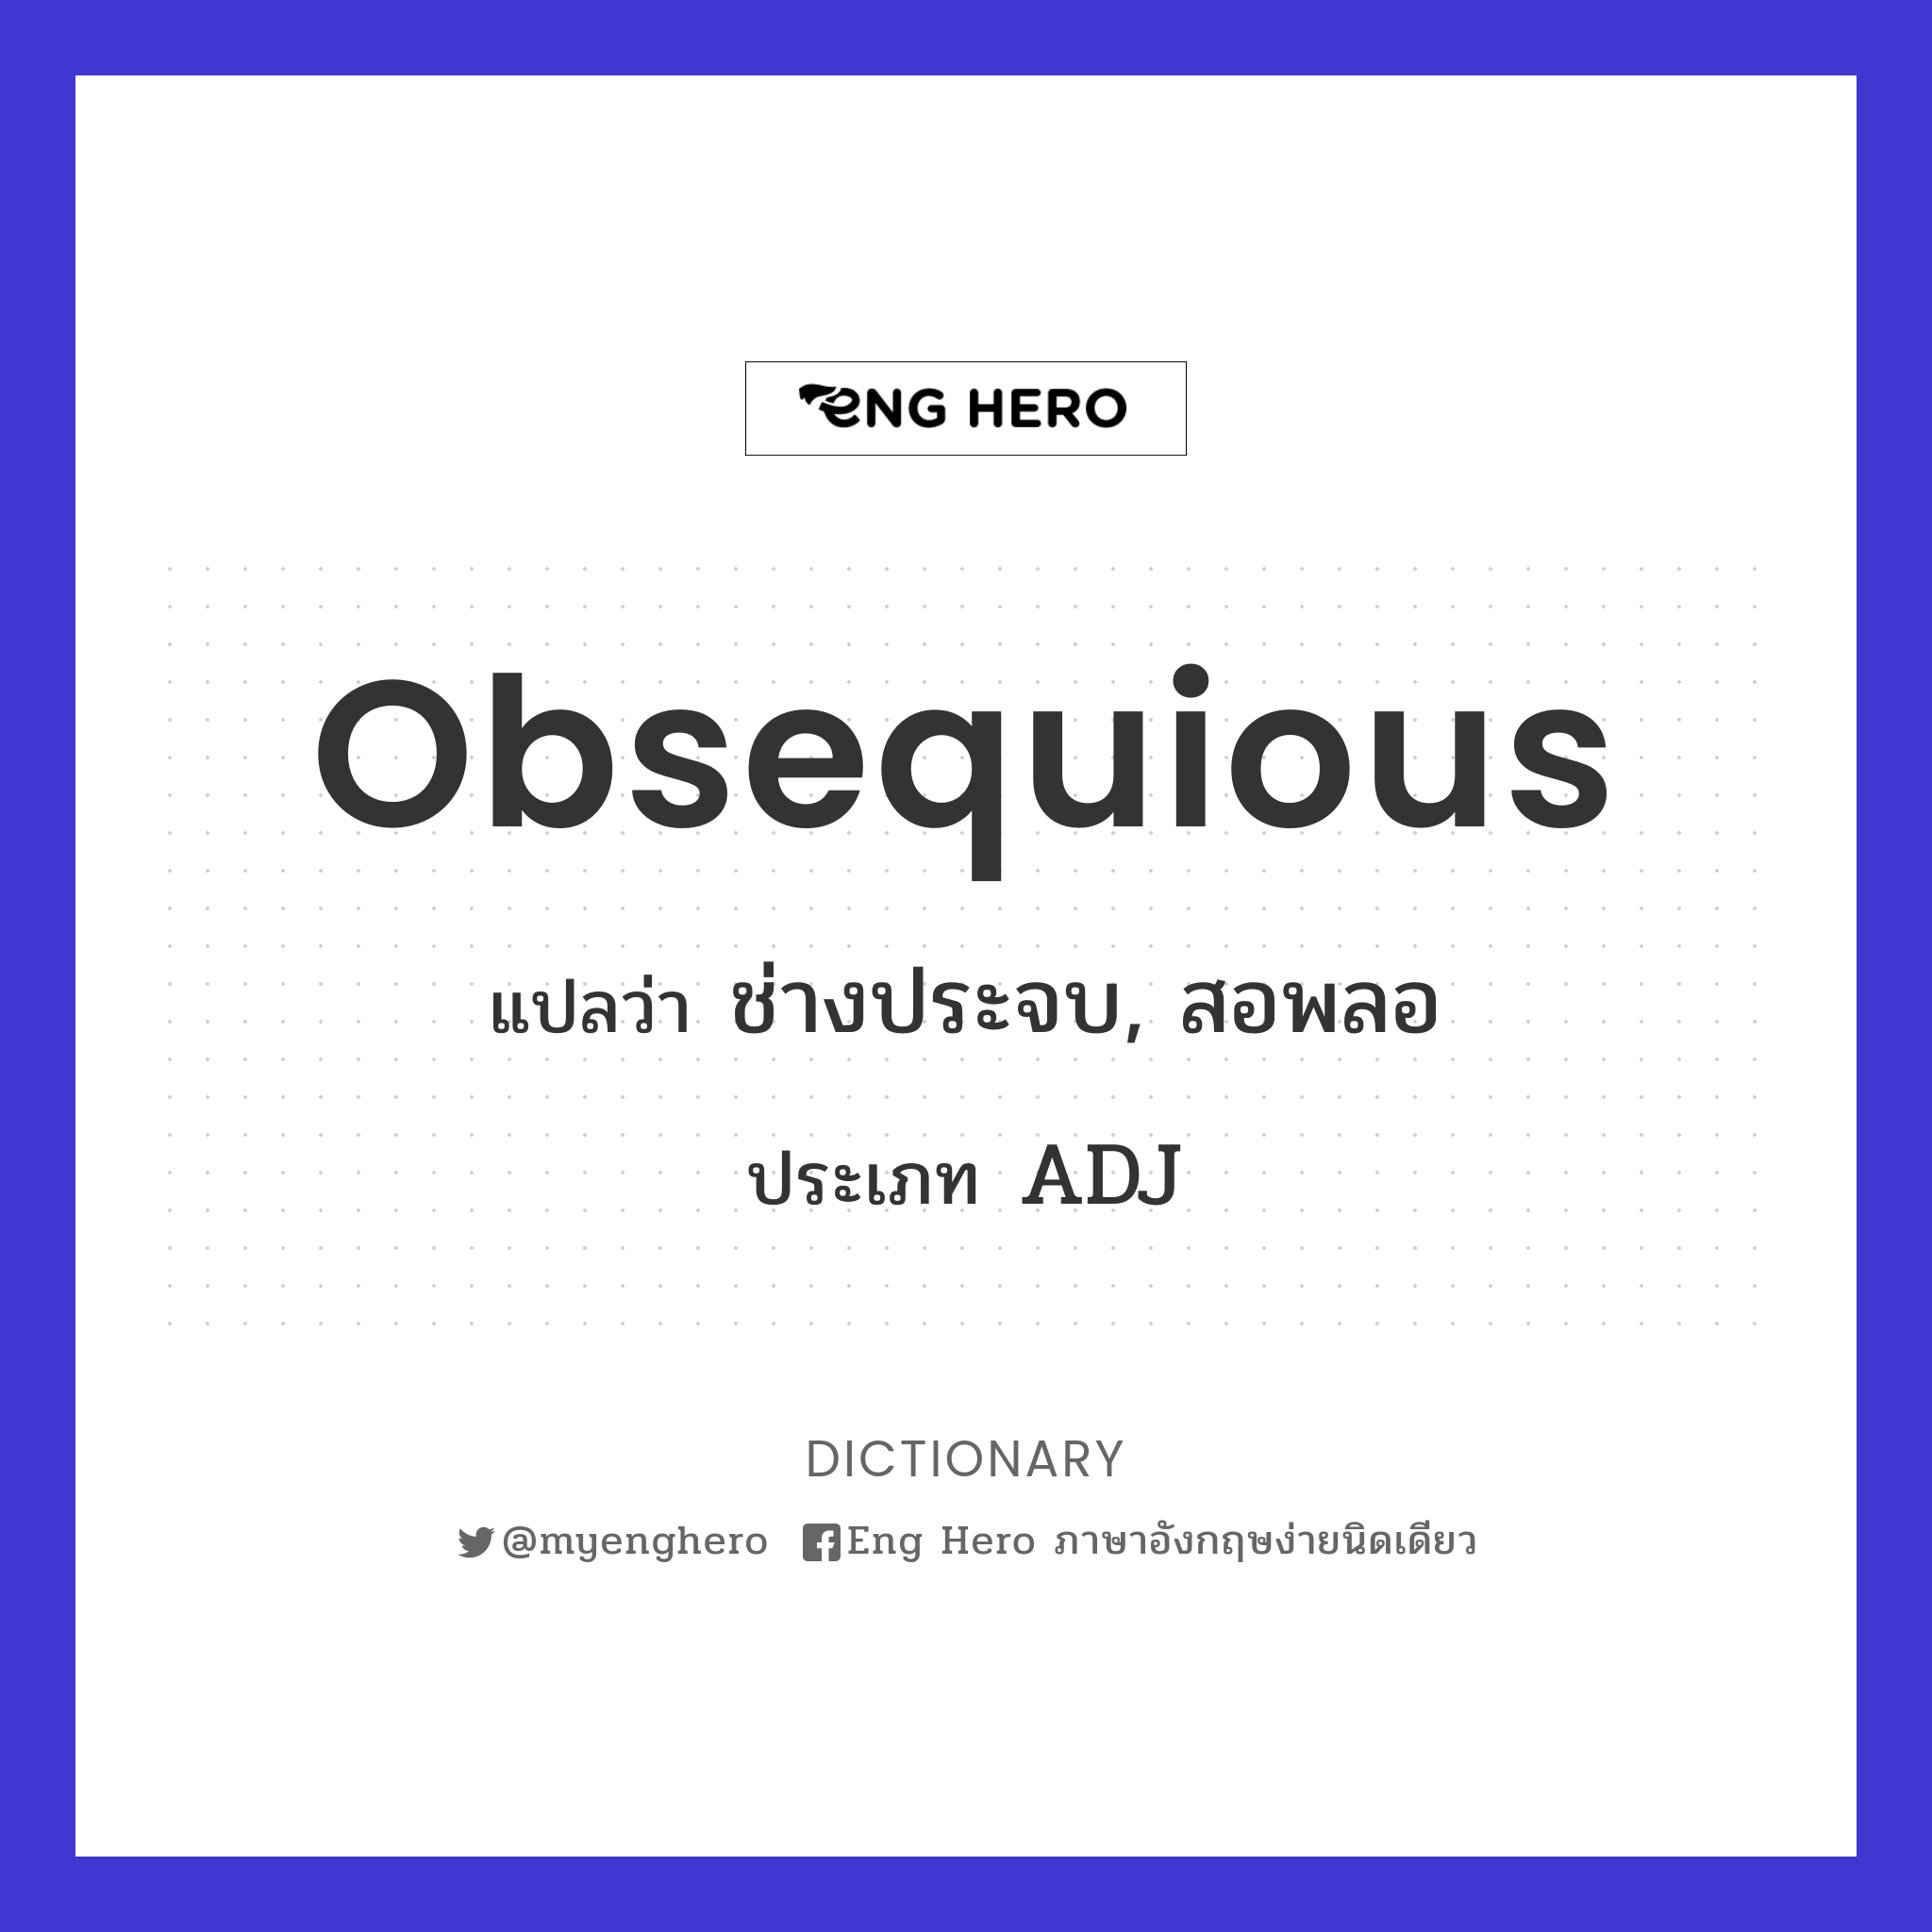 obsequious